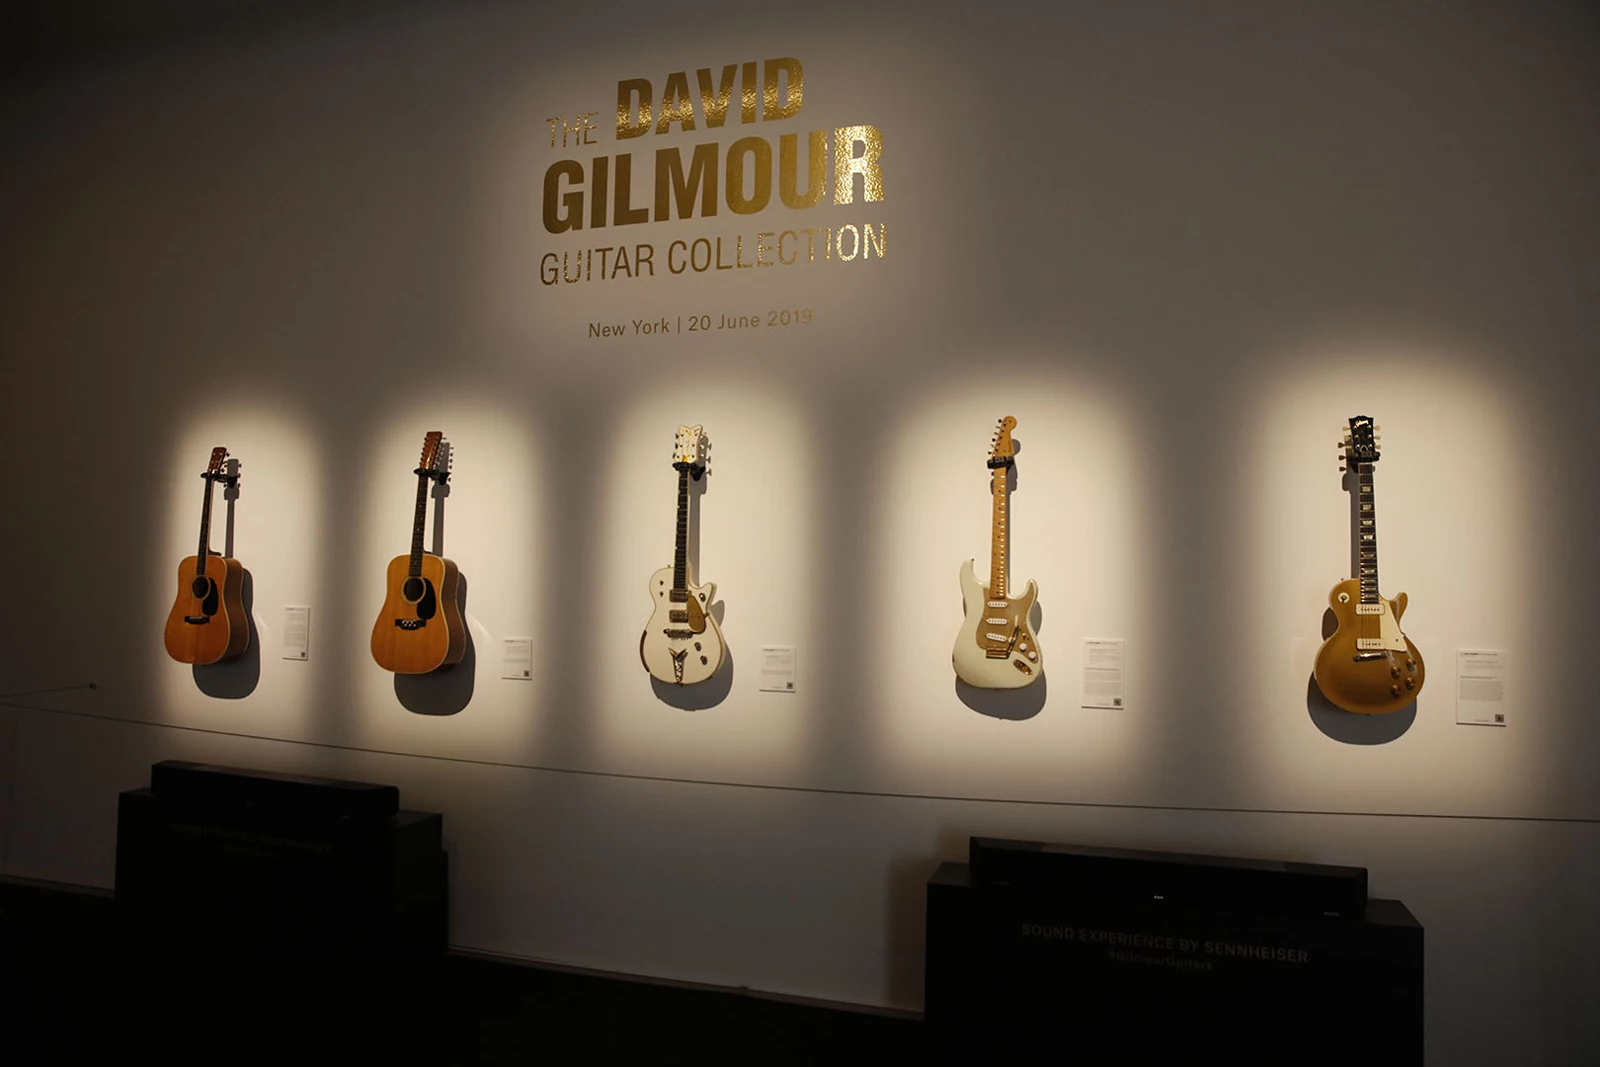 See Some of the Guitars David Gilmour Is Selling